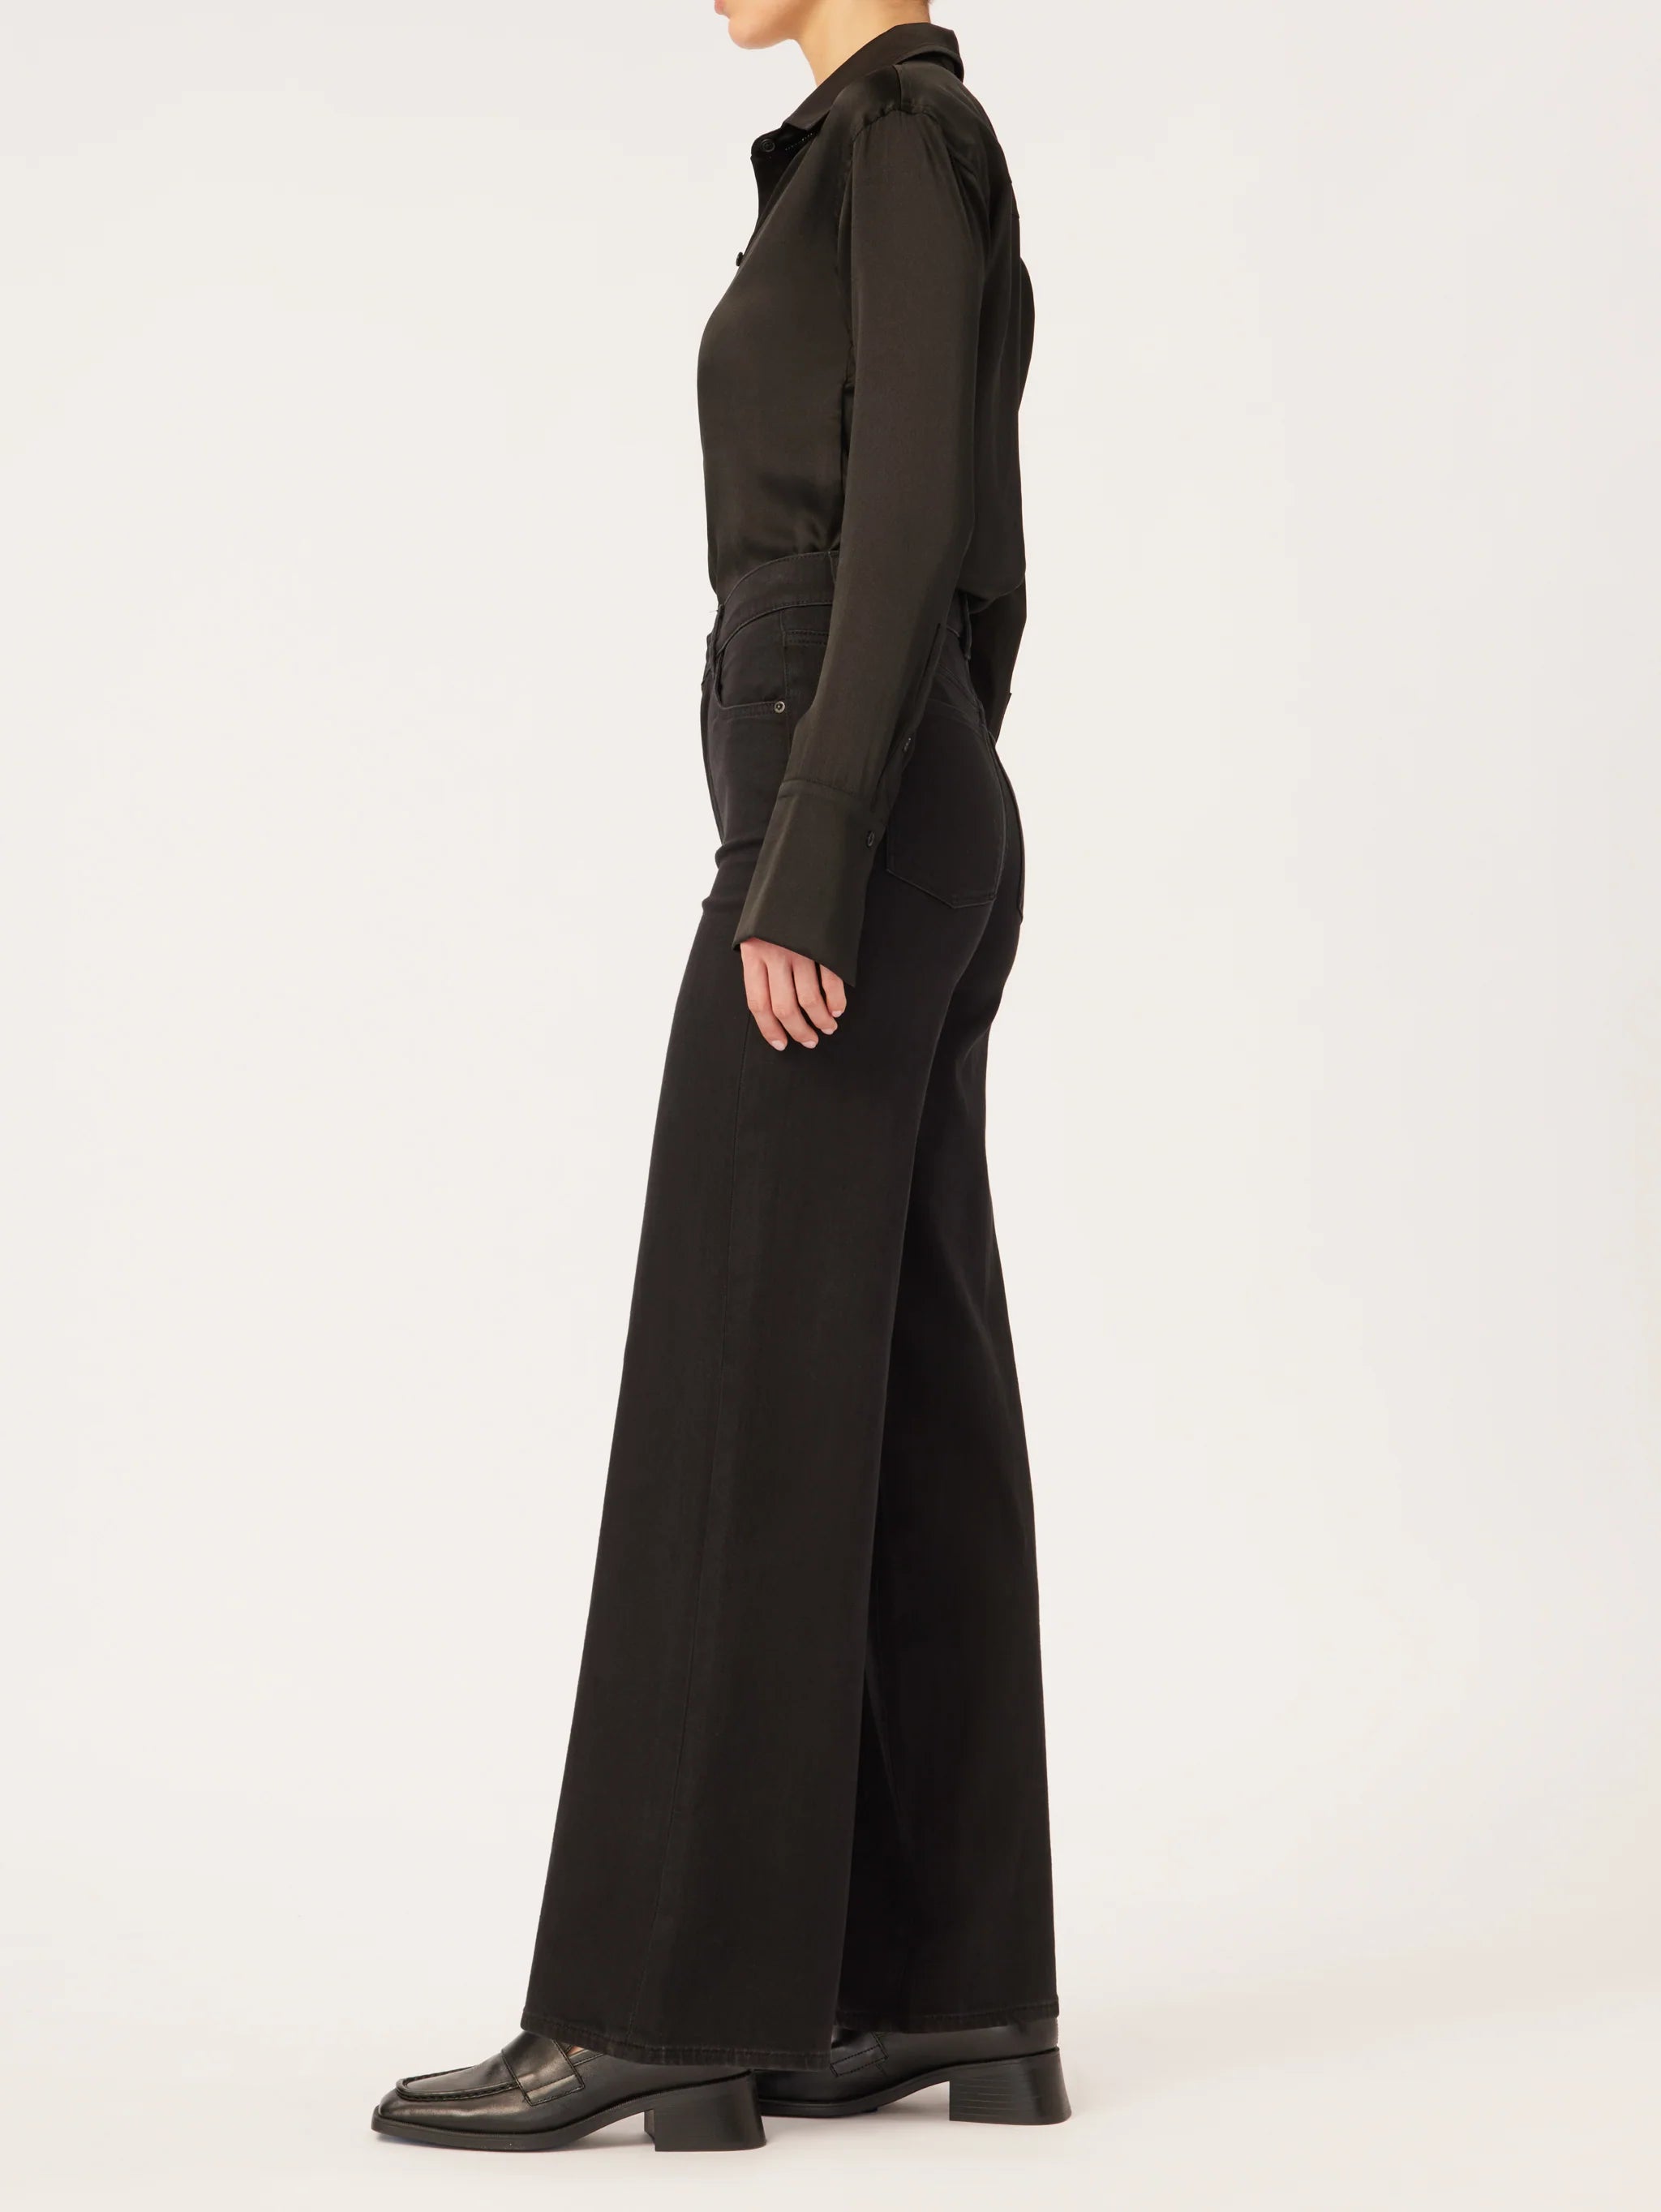 The back view of a woman wearing DL1961's Hepburn Wide Leg - Jet Black trousers with a vintage high-rise.